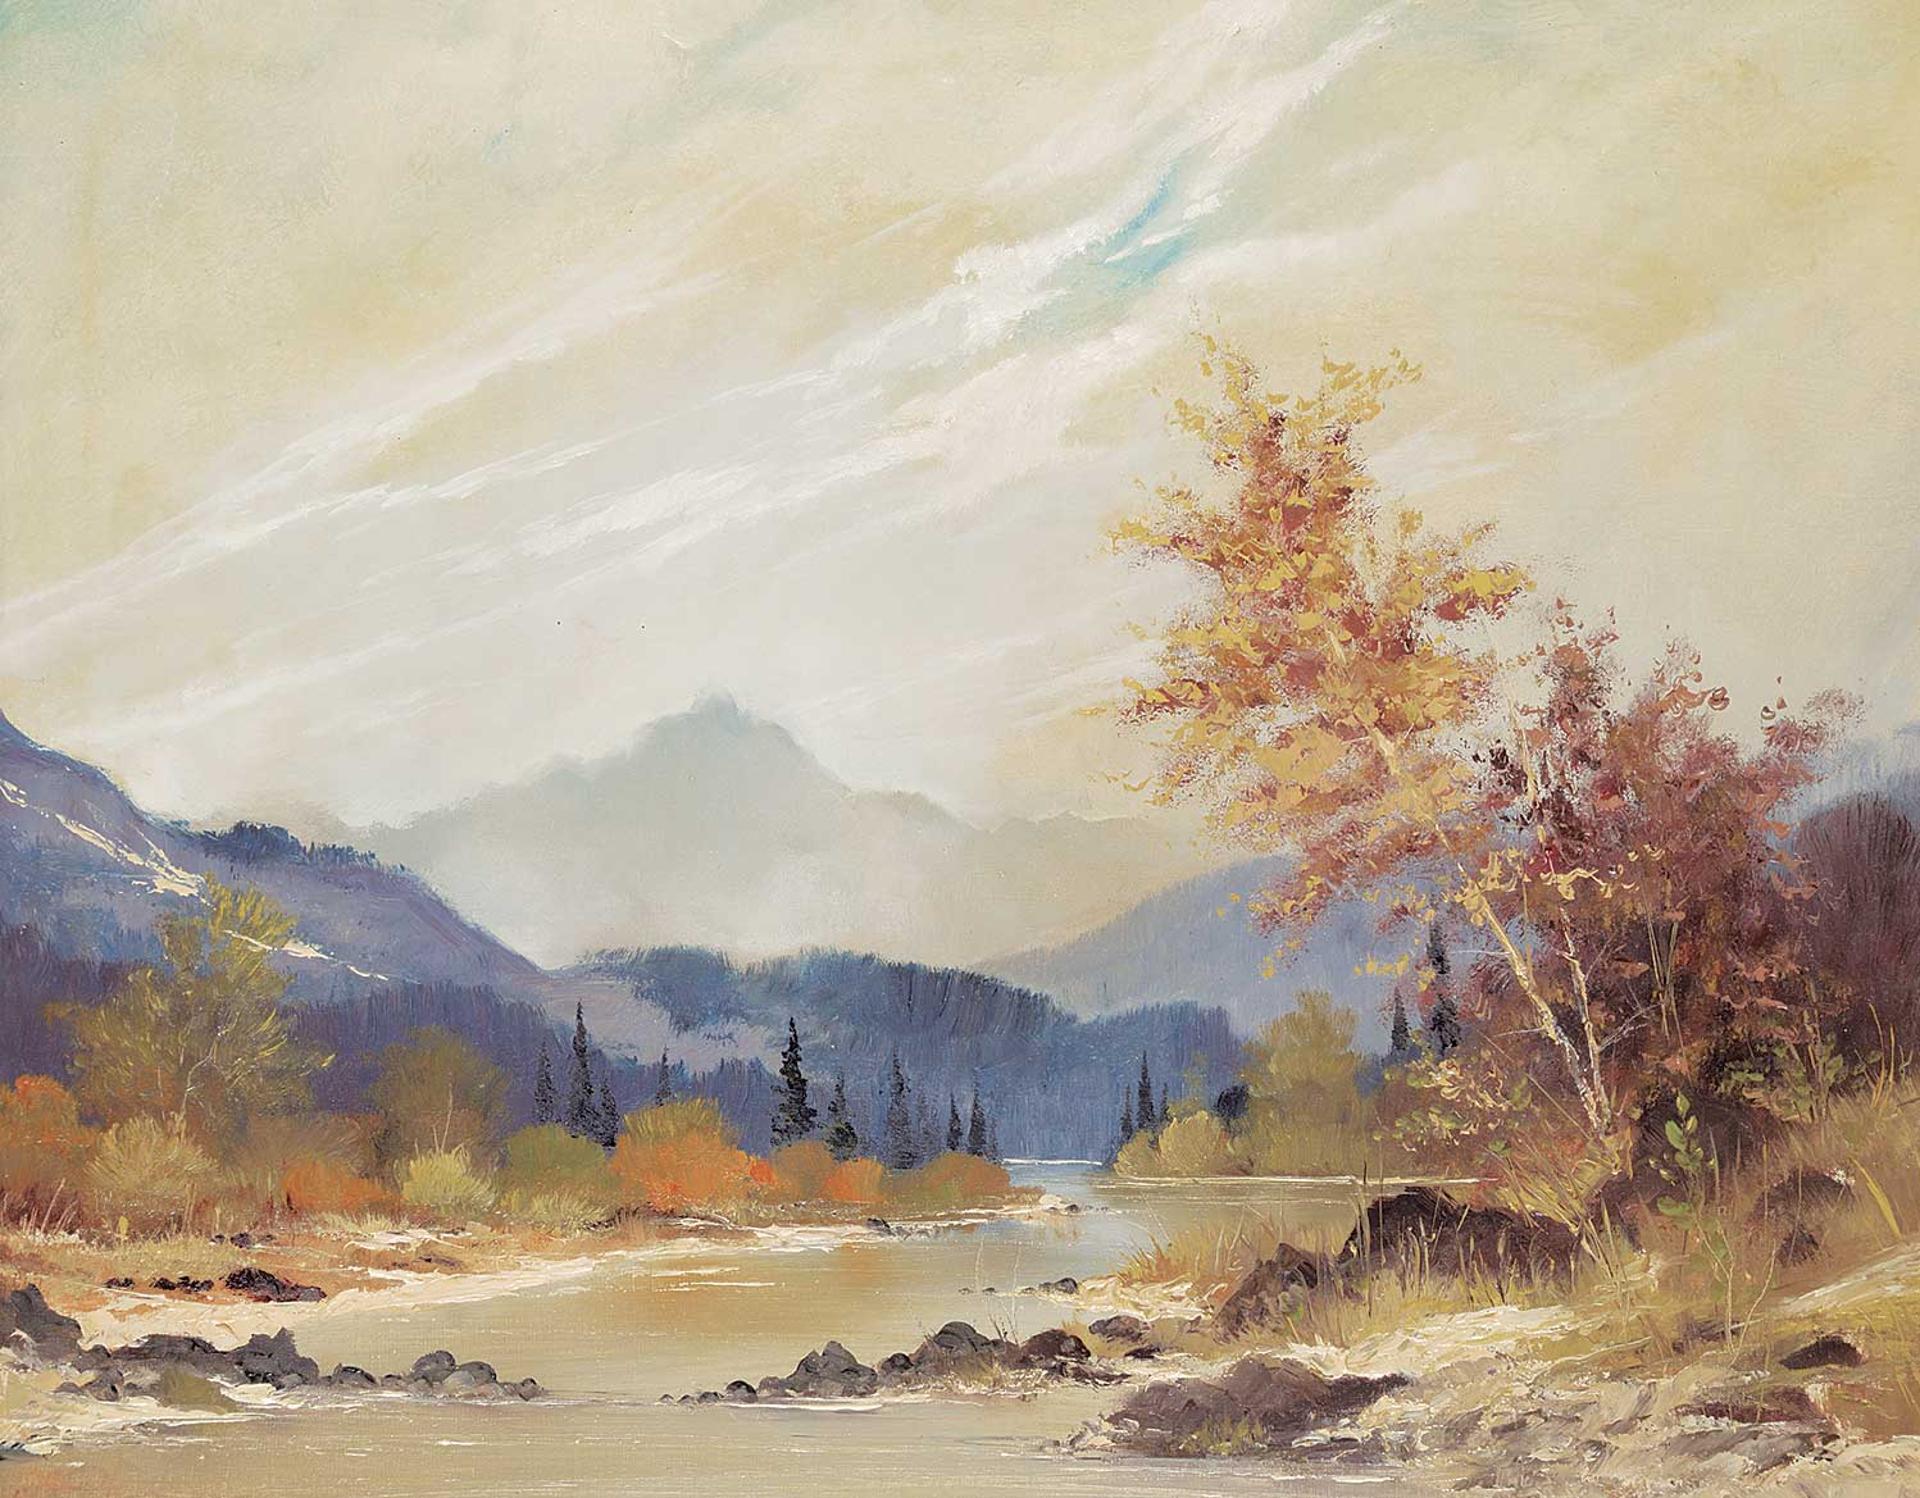 Warner R. Plangg - Untitled - Before the Mountains